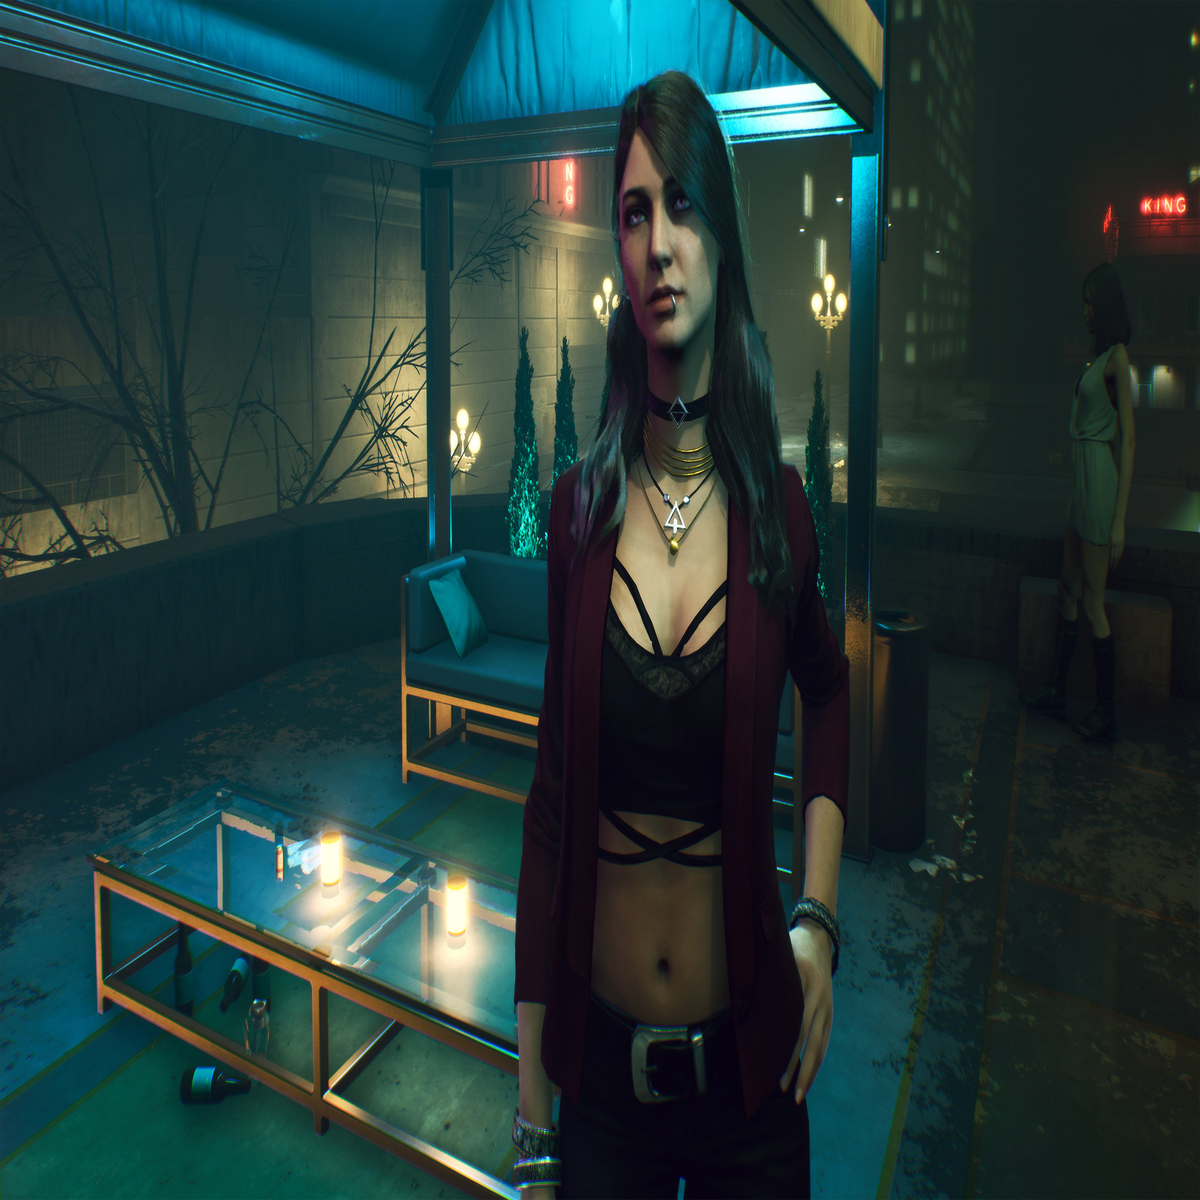 Third faction revealed for Vampire: The Masquerade - Bloodlines 2, The  Baron, runs the criminal underbelly of Seattle — GAMINGTREND